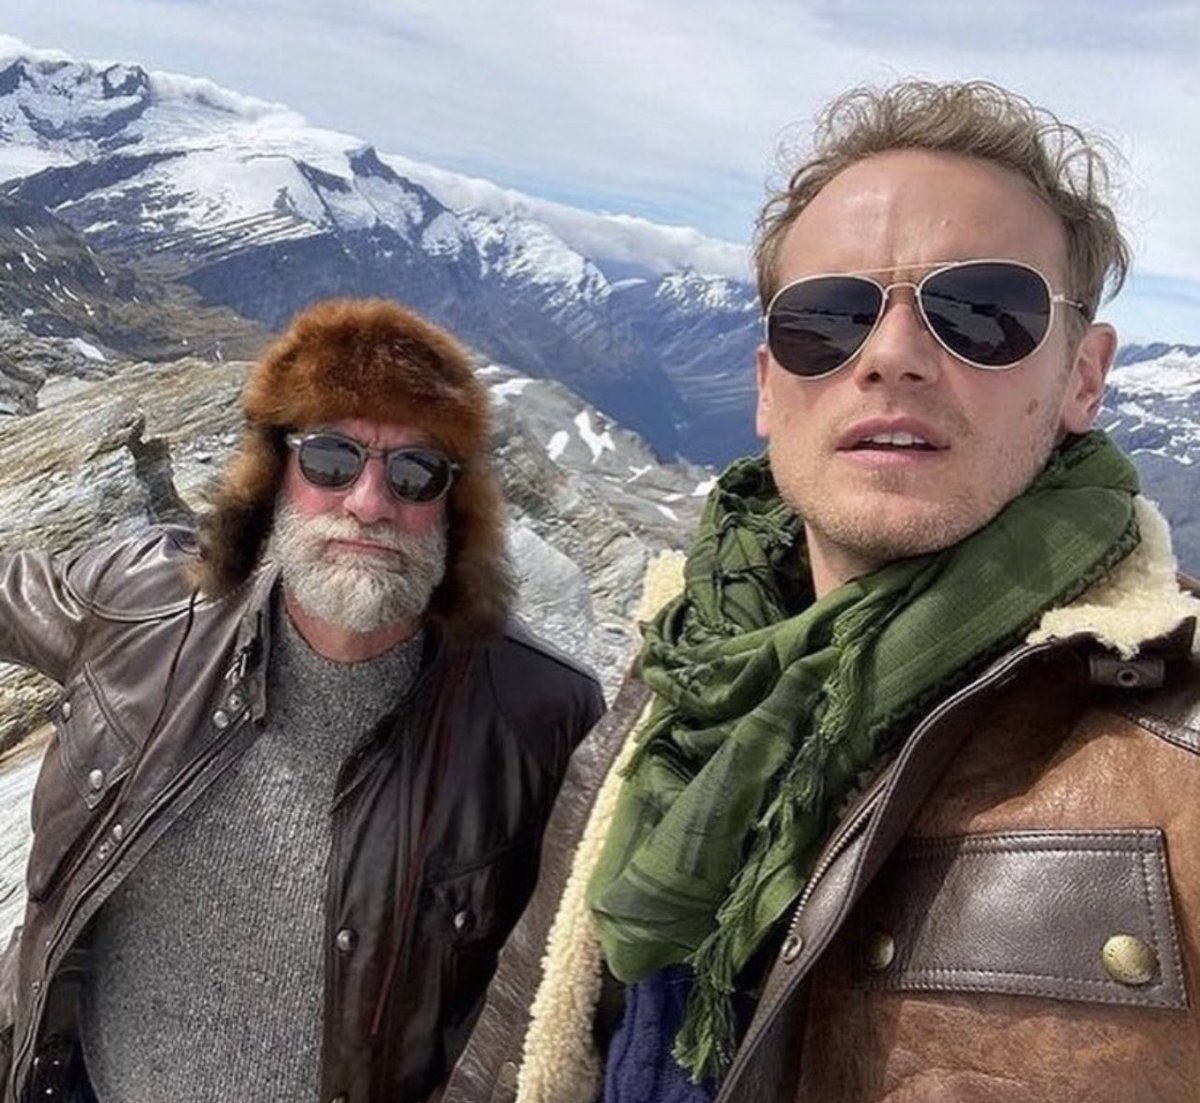 Who’s ready for another wild ride with @SamHeughan & @grahammctavish?! 
They’re ready.😎
Are you?!!
I am.

#Clanlands #NewZealand #MenInKilts #thenextadventure #howfarwillsamgo #didgrahamactuallysurvive #betterbringmorewhisky